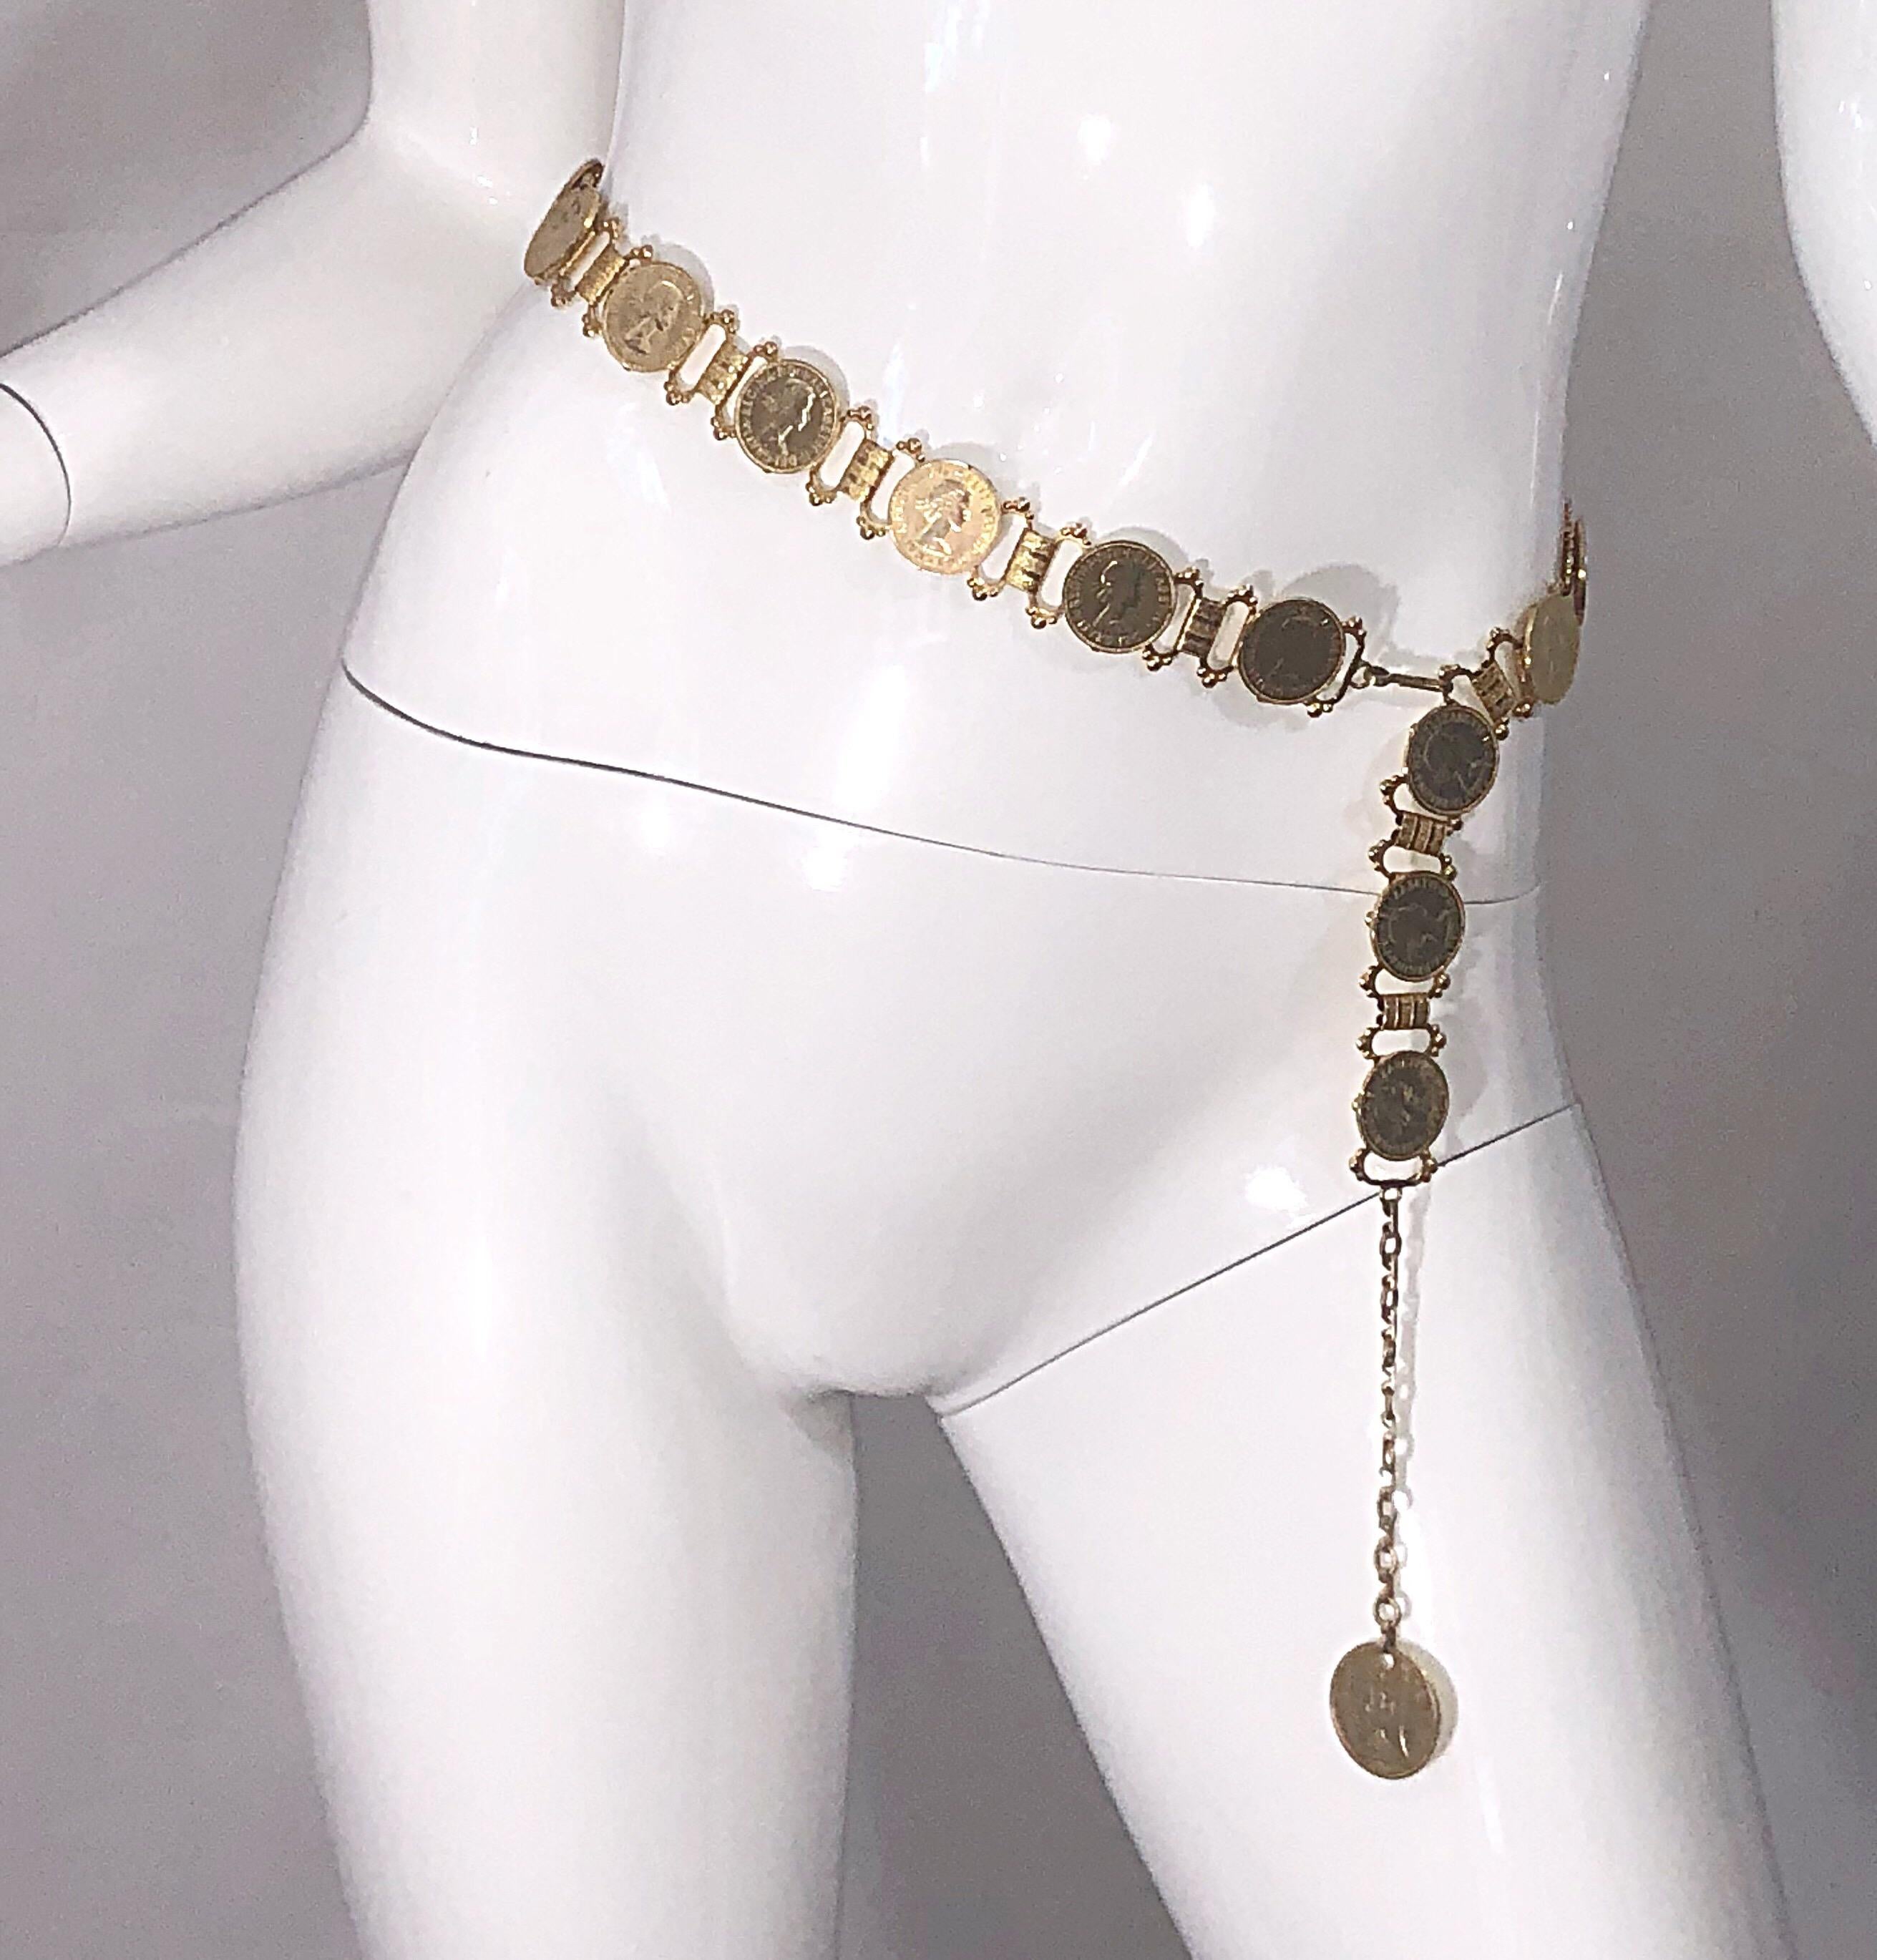 Chic late 1960s ELIZABETH DEI GRATIA gold coin novelty belt or necklace! Features authentic gold coins with intricate links connecting the coins. Can be dressed up or down with a dress or jeans. Also great as a chunky choker or long necklace. 
In